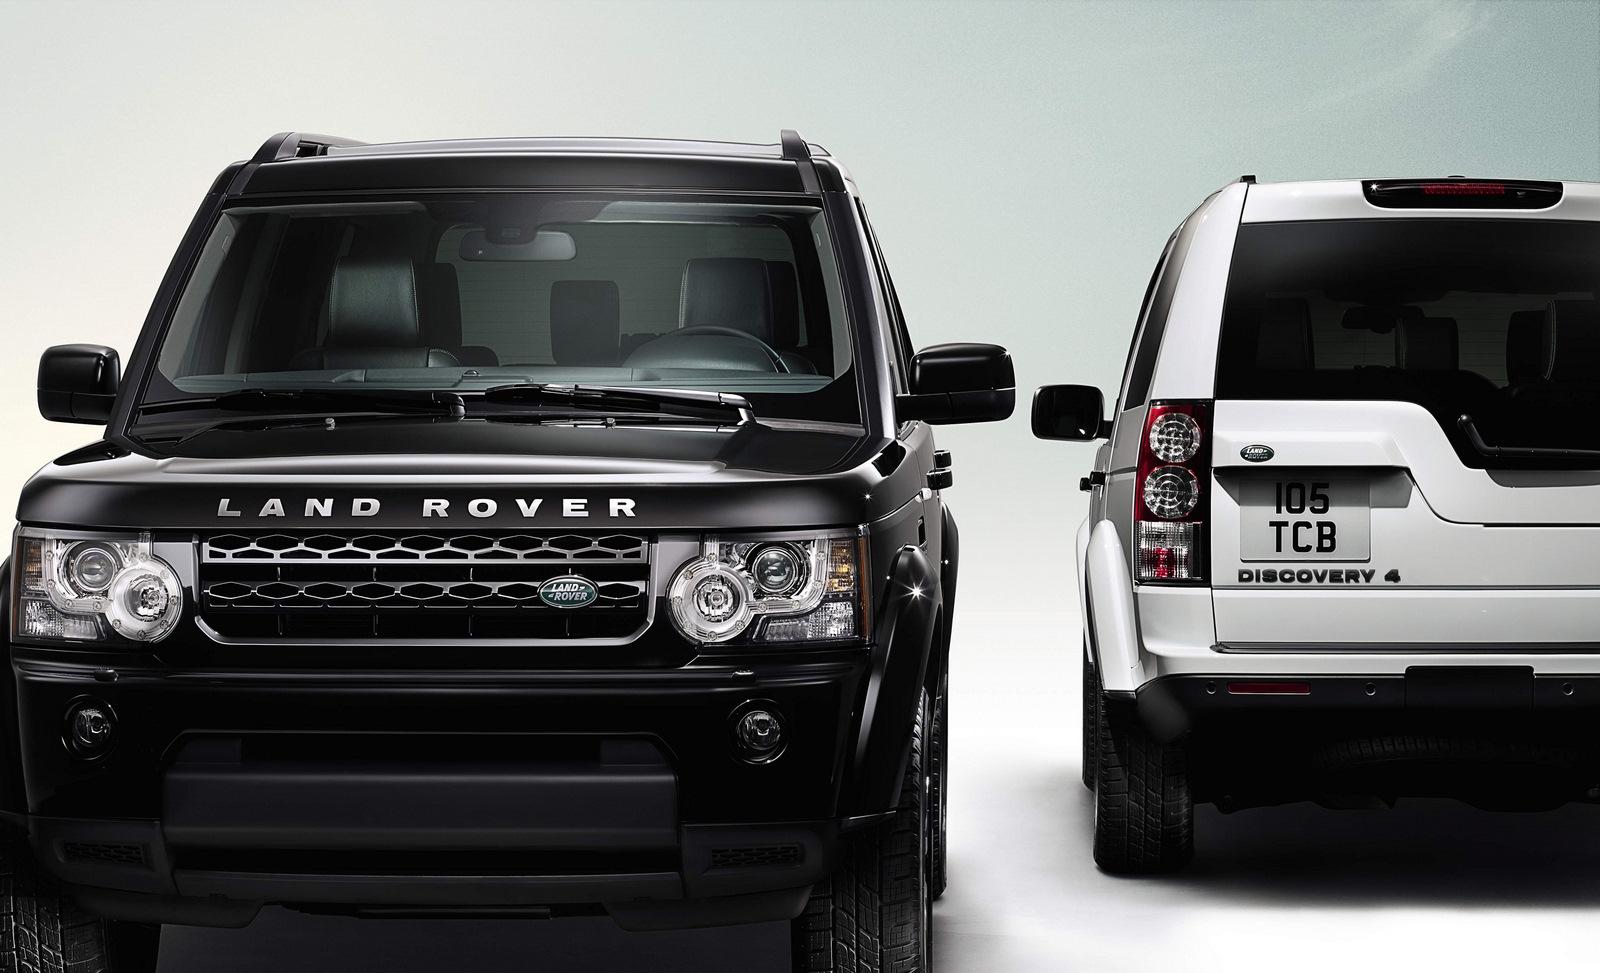 Land Rover Discovery 4 Landmark Special Edition